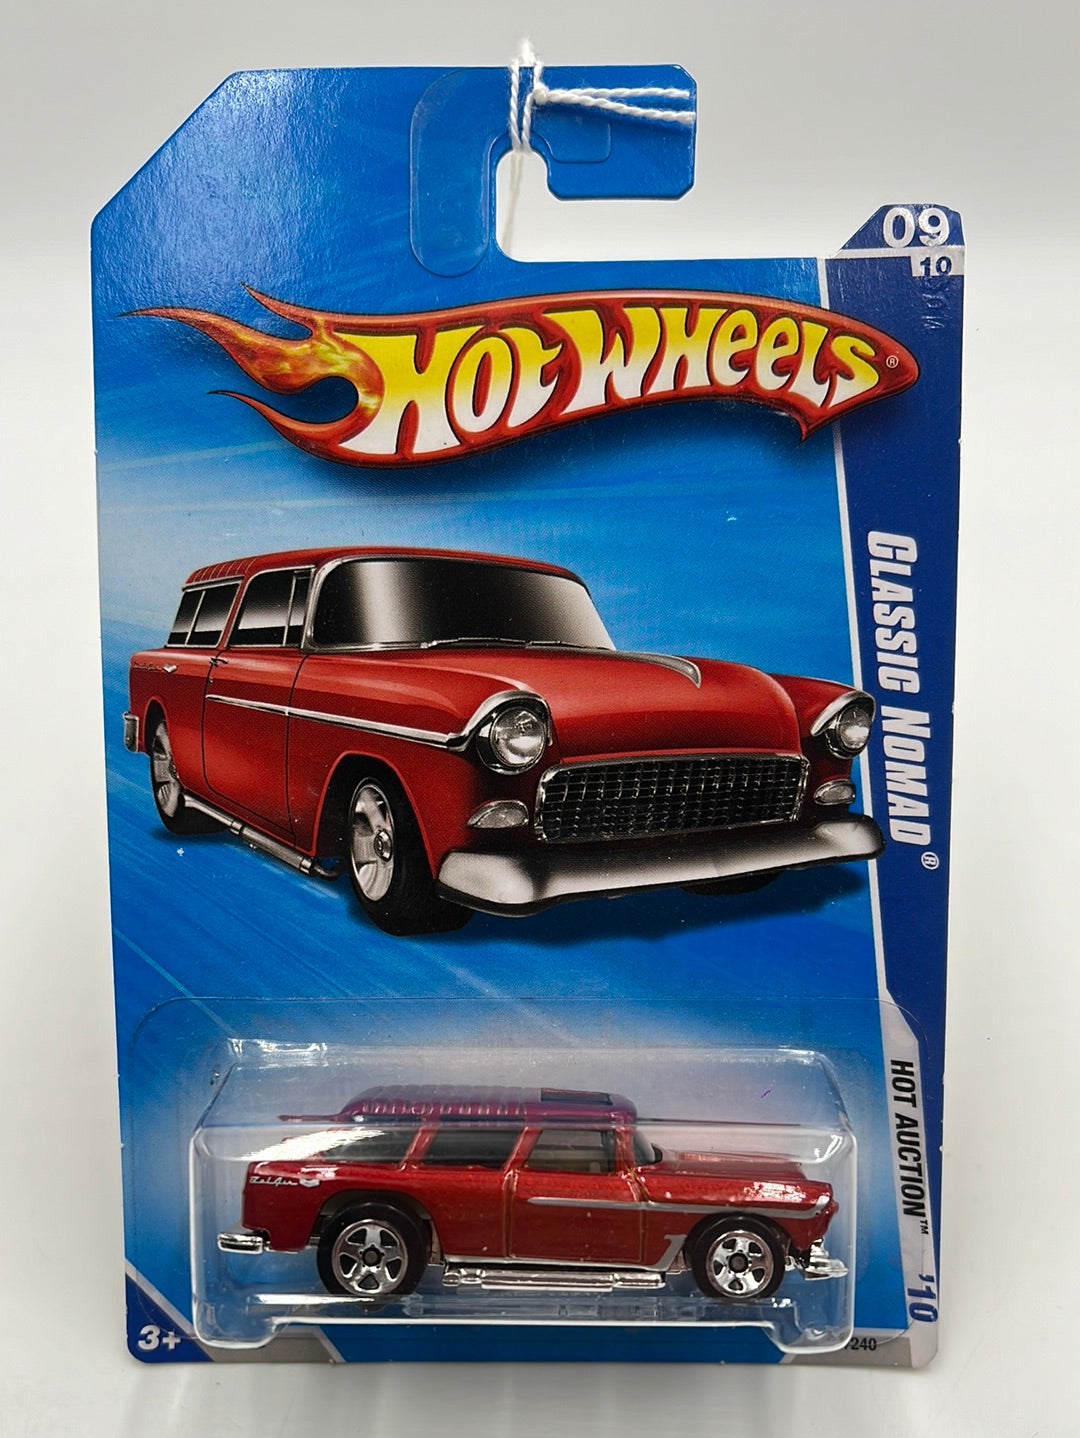 2010 Hot Wheels Hot Auction Classic Nomad Red 167/240 5F